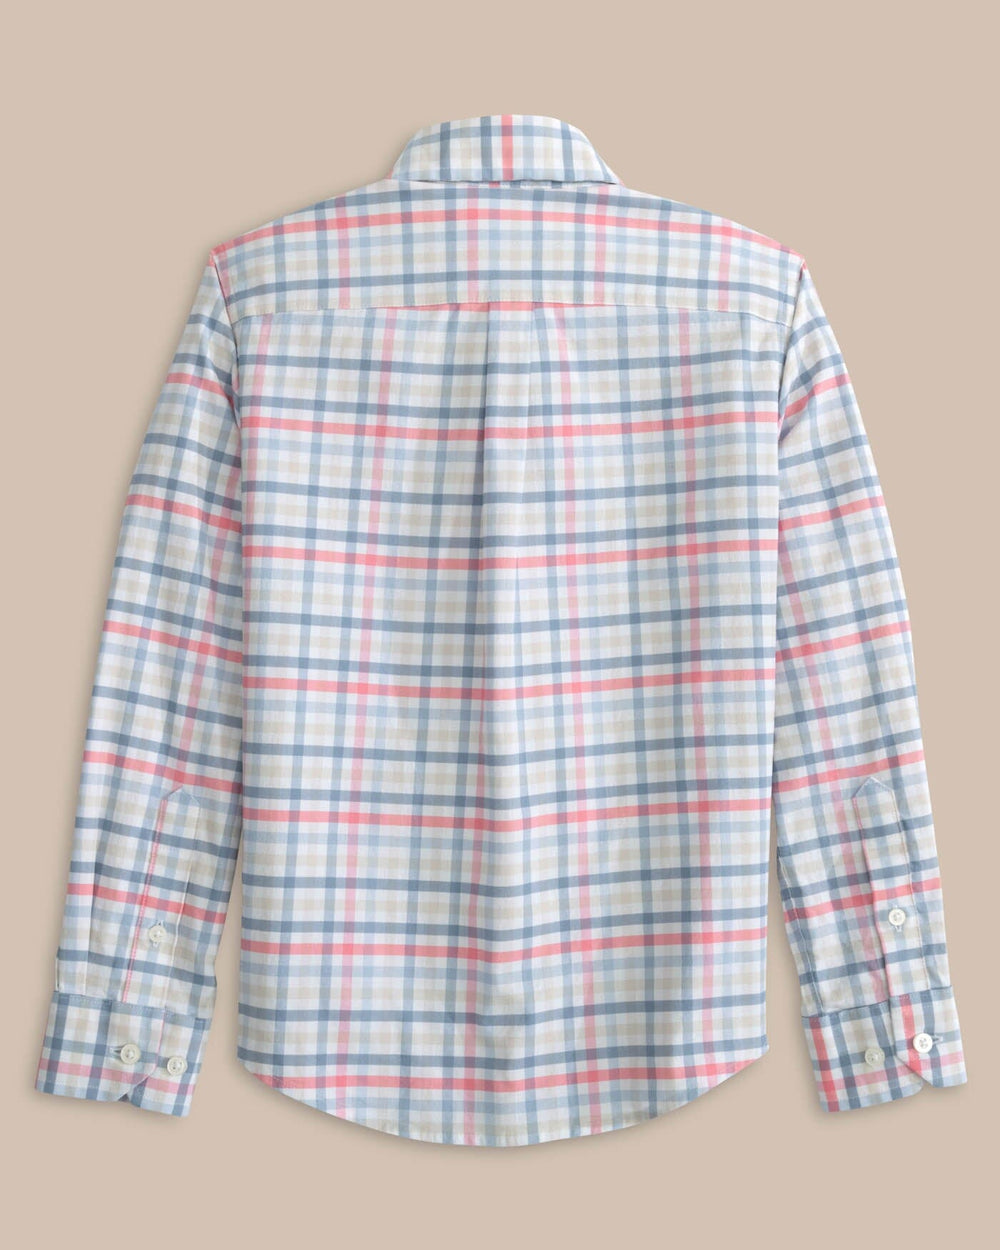 The back view of the Southern Tide youth-coastal-passage-pelham-plaid-long-sleeve-sportshirt by Southern Tide - Geranium Pink